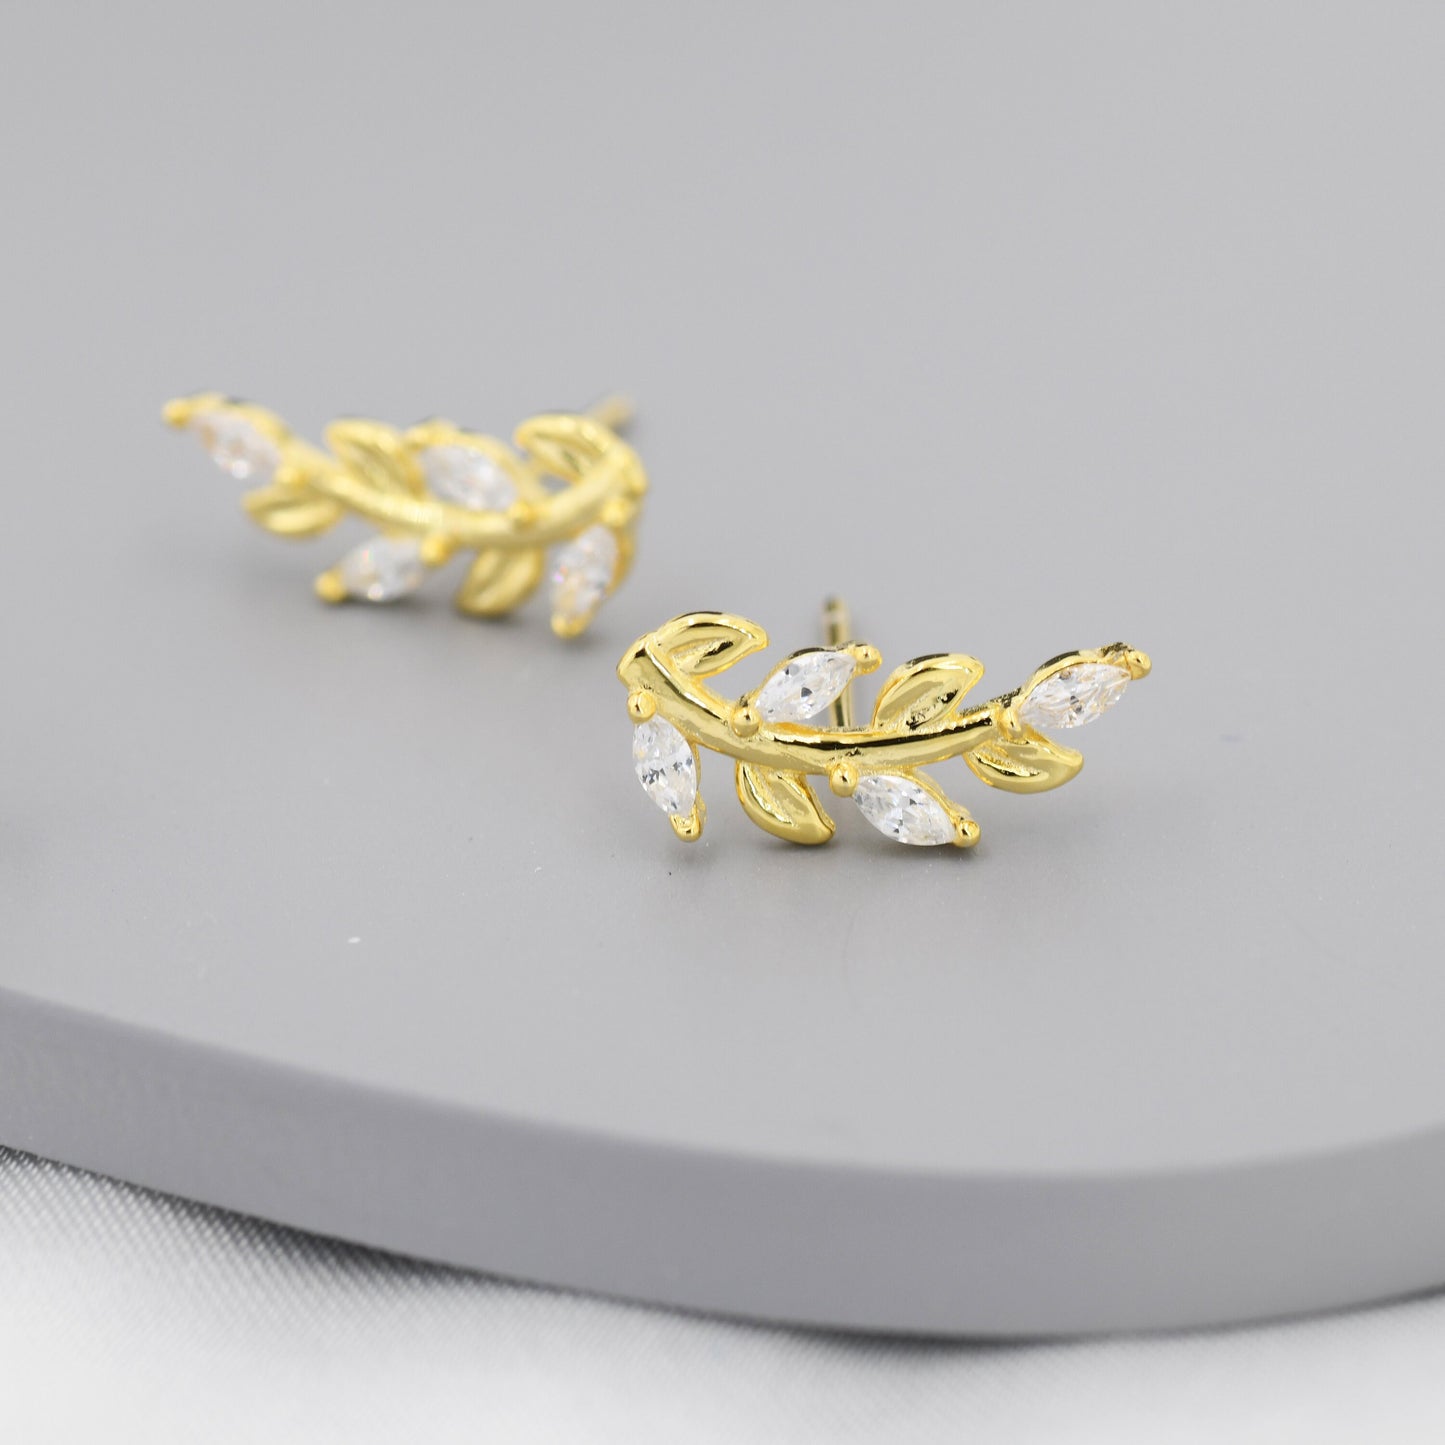 Sparkly Leaf CZ Stud Earrings in Sterling Silver, Silver or Gold, Bridal Jewellery, Bridesmaid&#39;s Earrings, Nature Inspired, Botanical